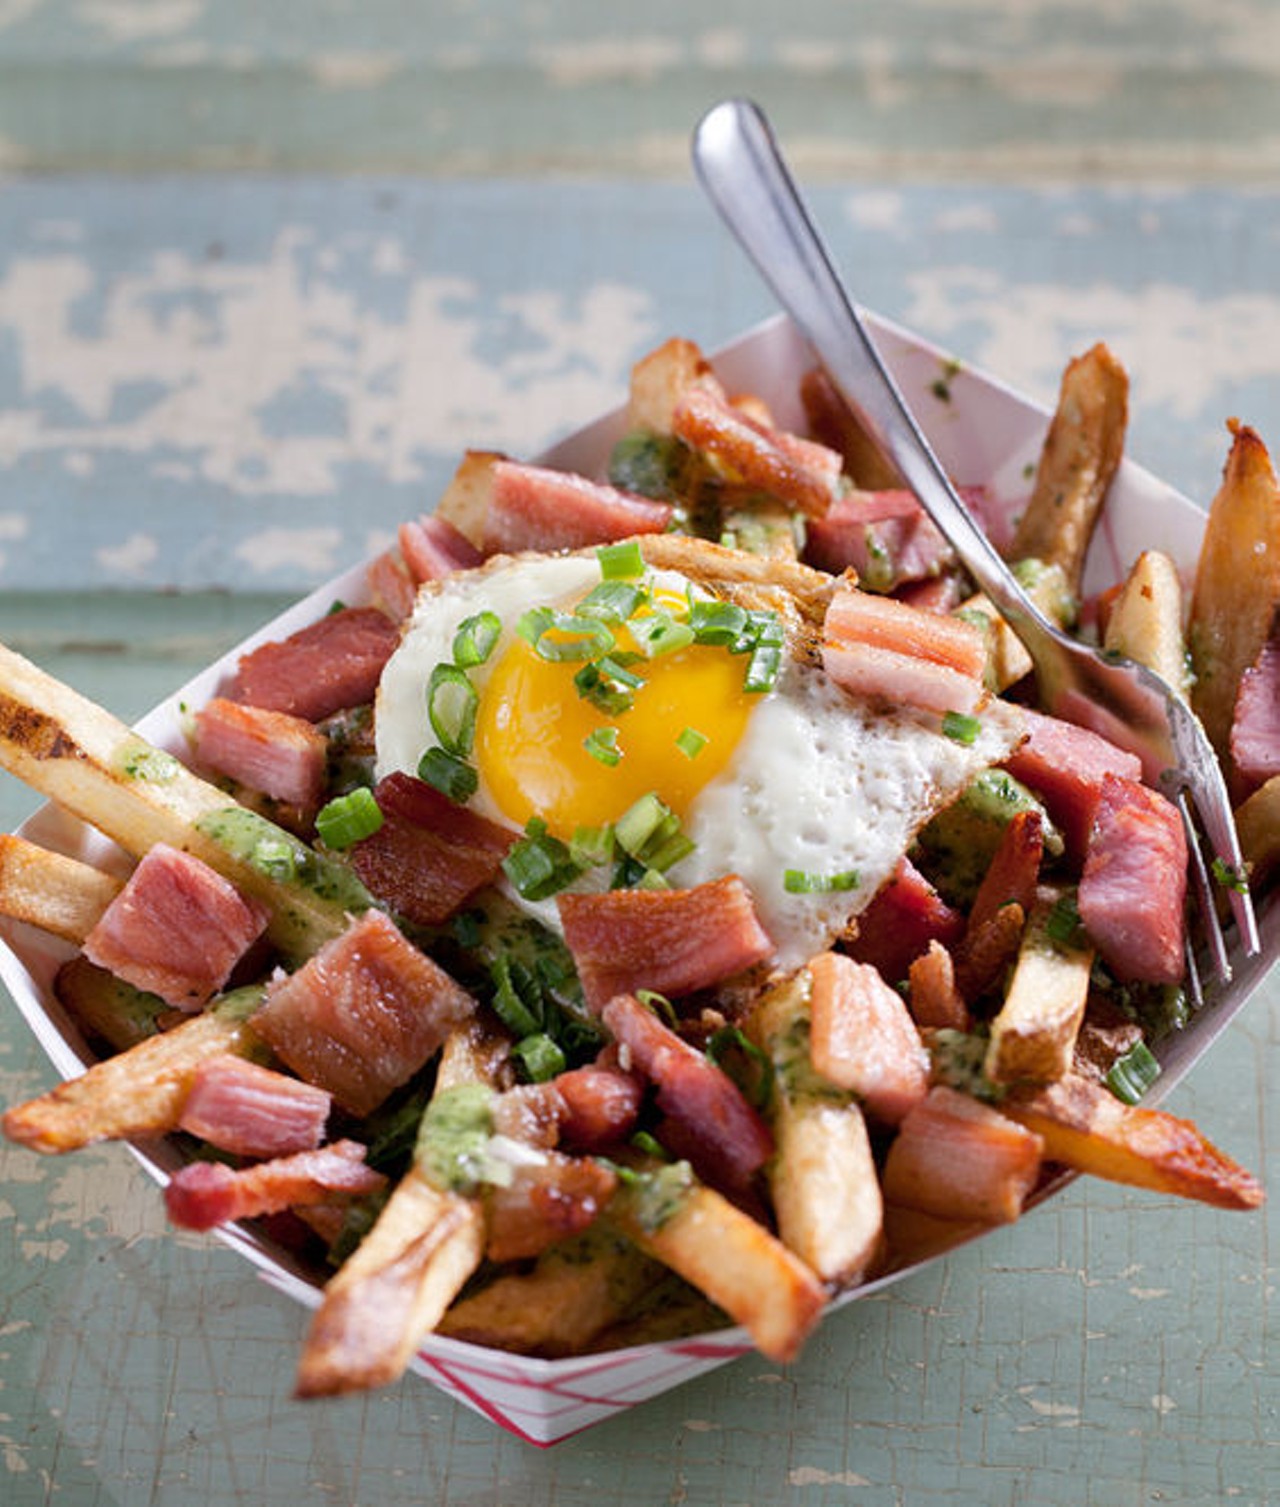 One of the menu's "Boardwalk Fries," the "Green Eggs N Ham" is fresh cut Idaho russett potatoes tossed in sea salt, a fried egg, diced ham, creamed spinach, and green onion. See more photos from the Shack Pubgrub.